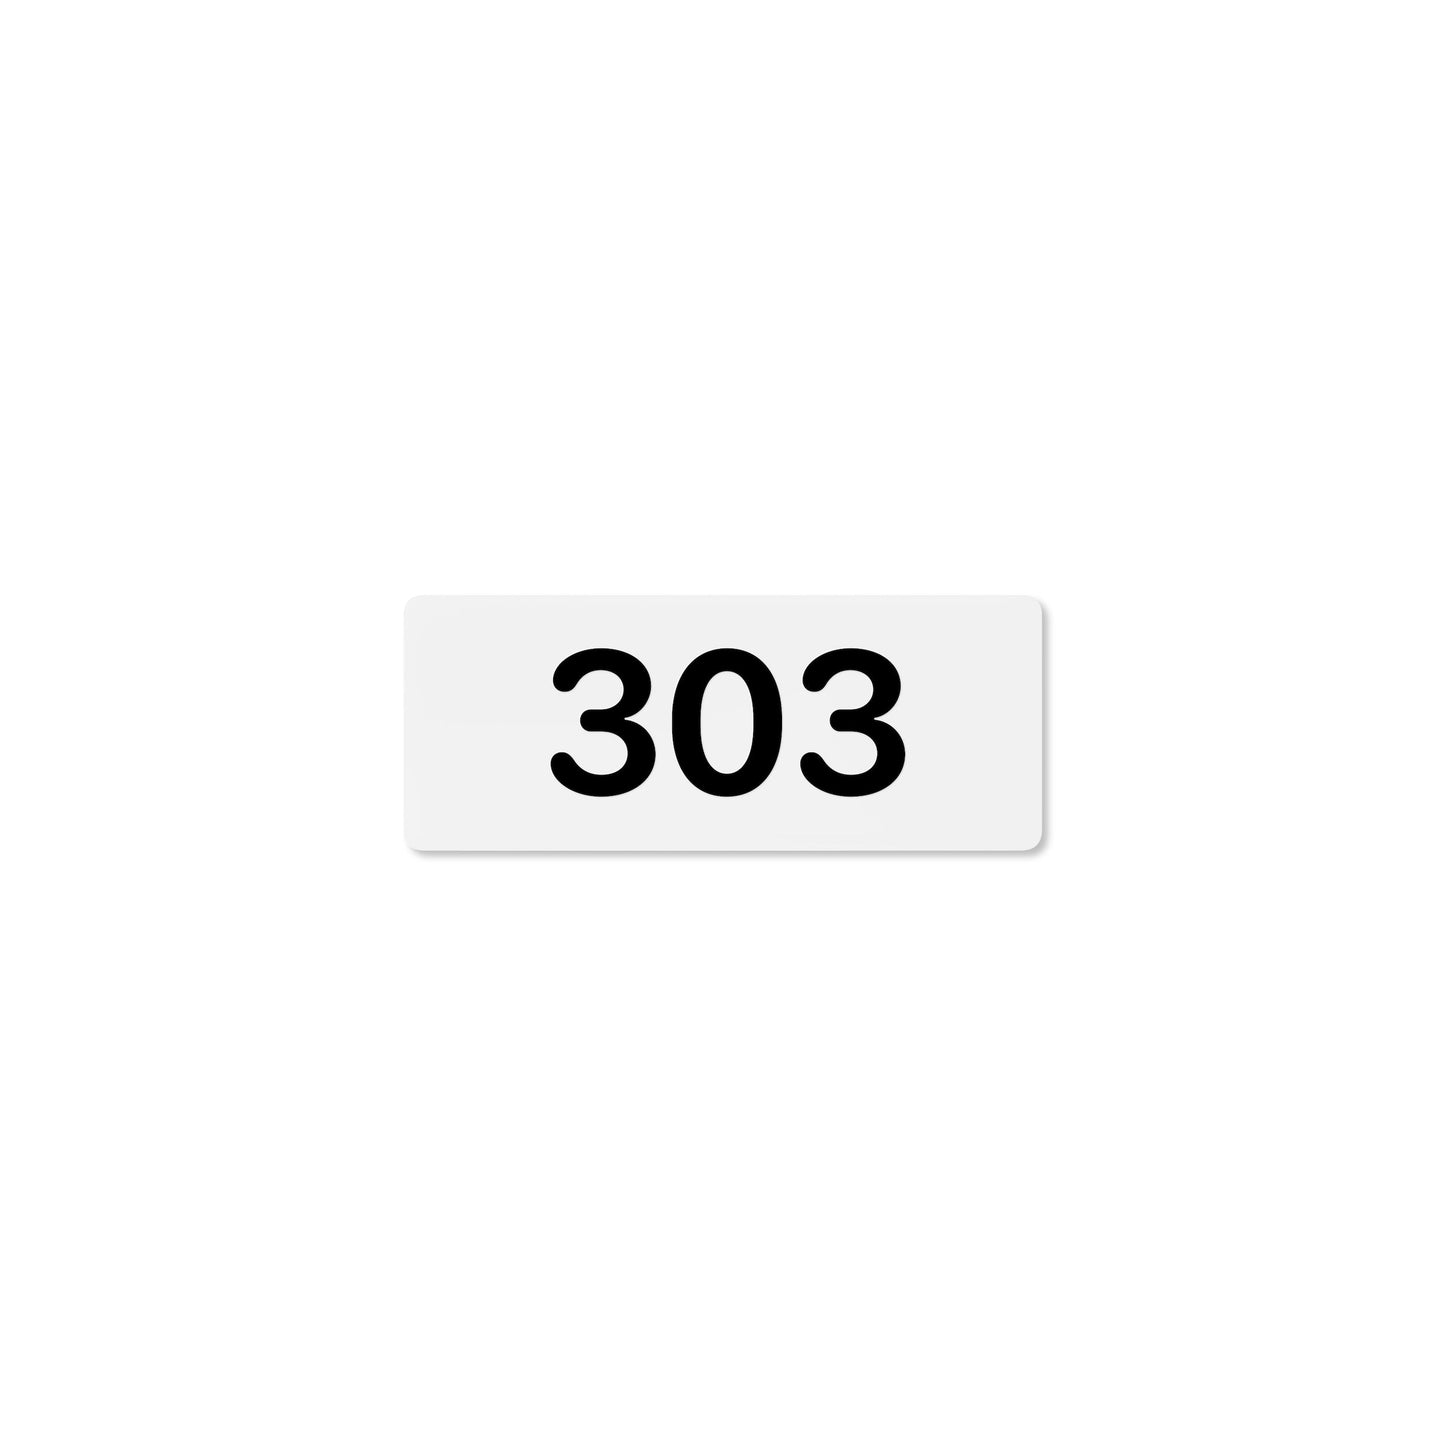 Numeral 303